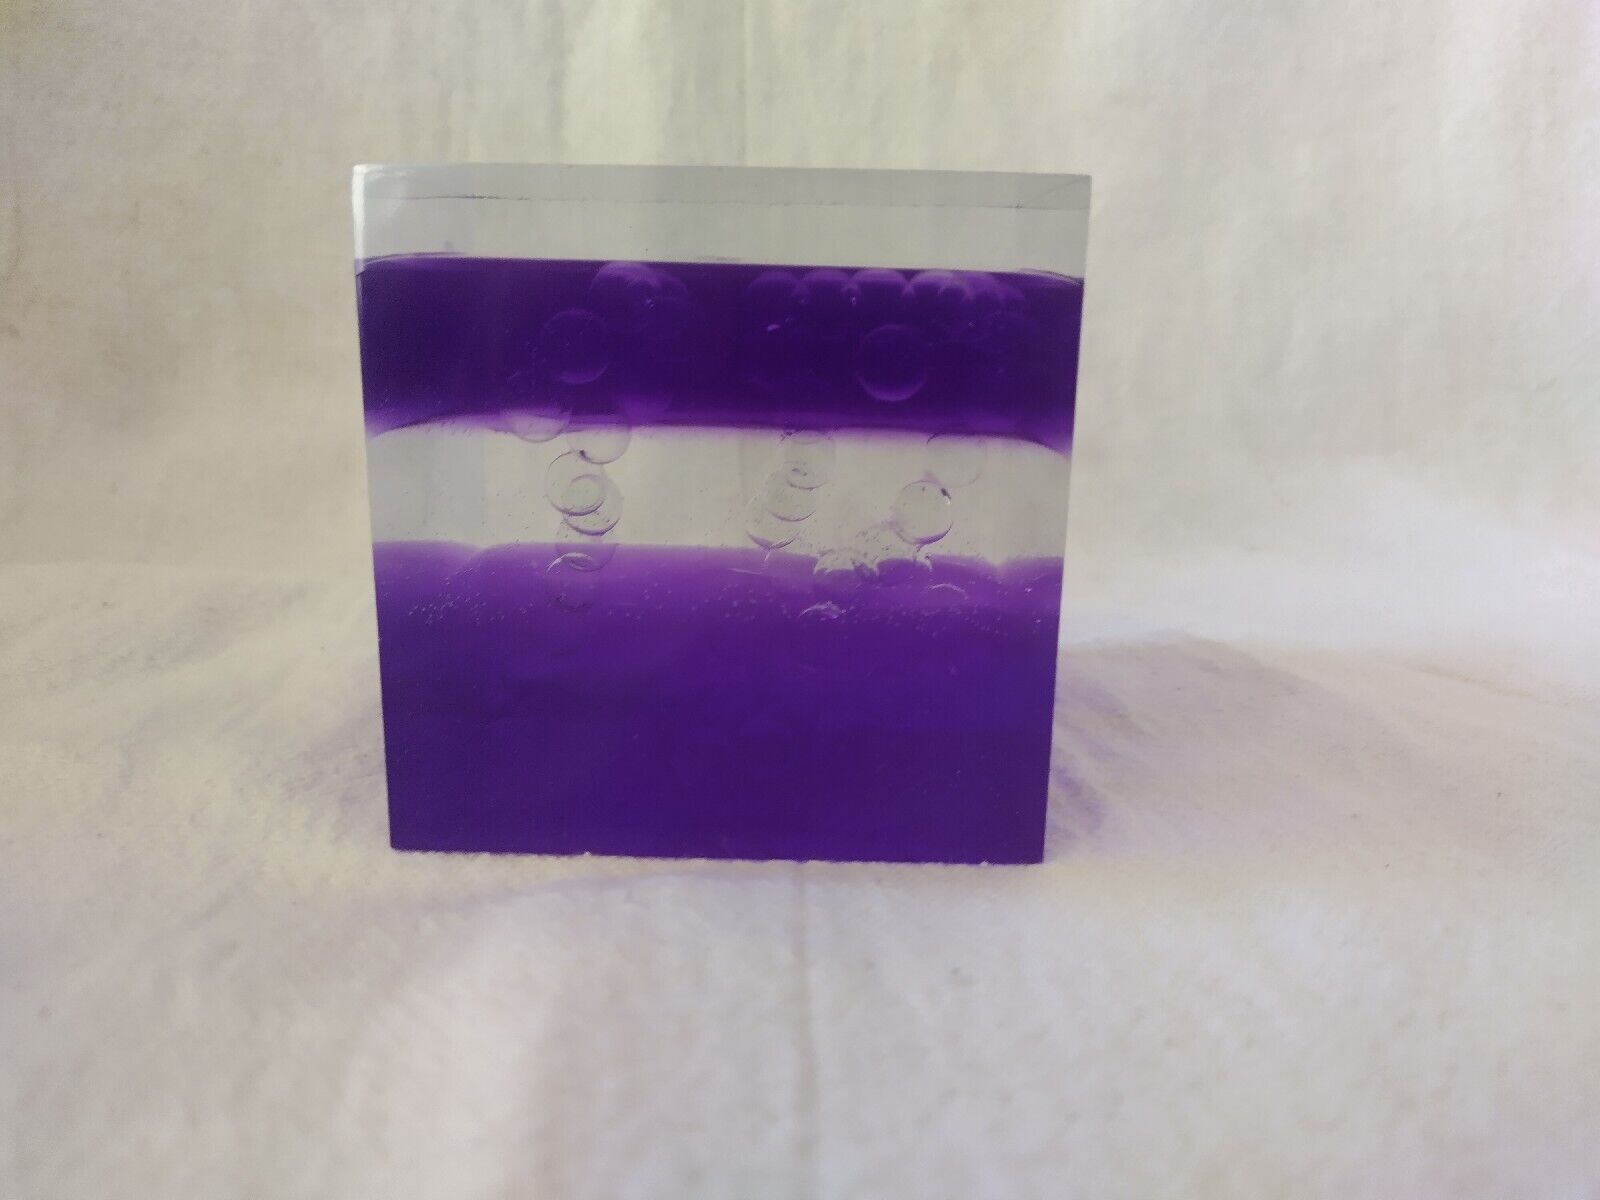 Two 3x3 Cube Resin Purple Clear Sculpture / Paperweights Similar to Enzo Mari 